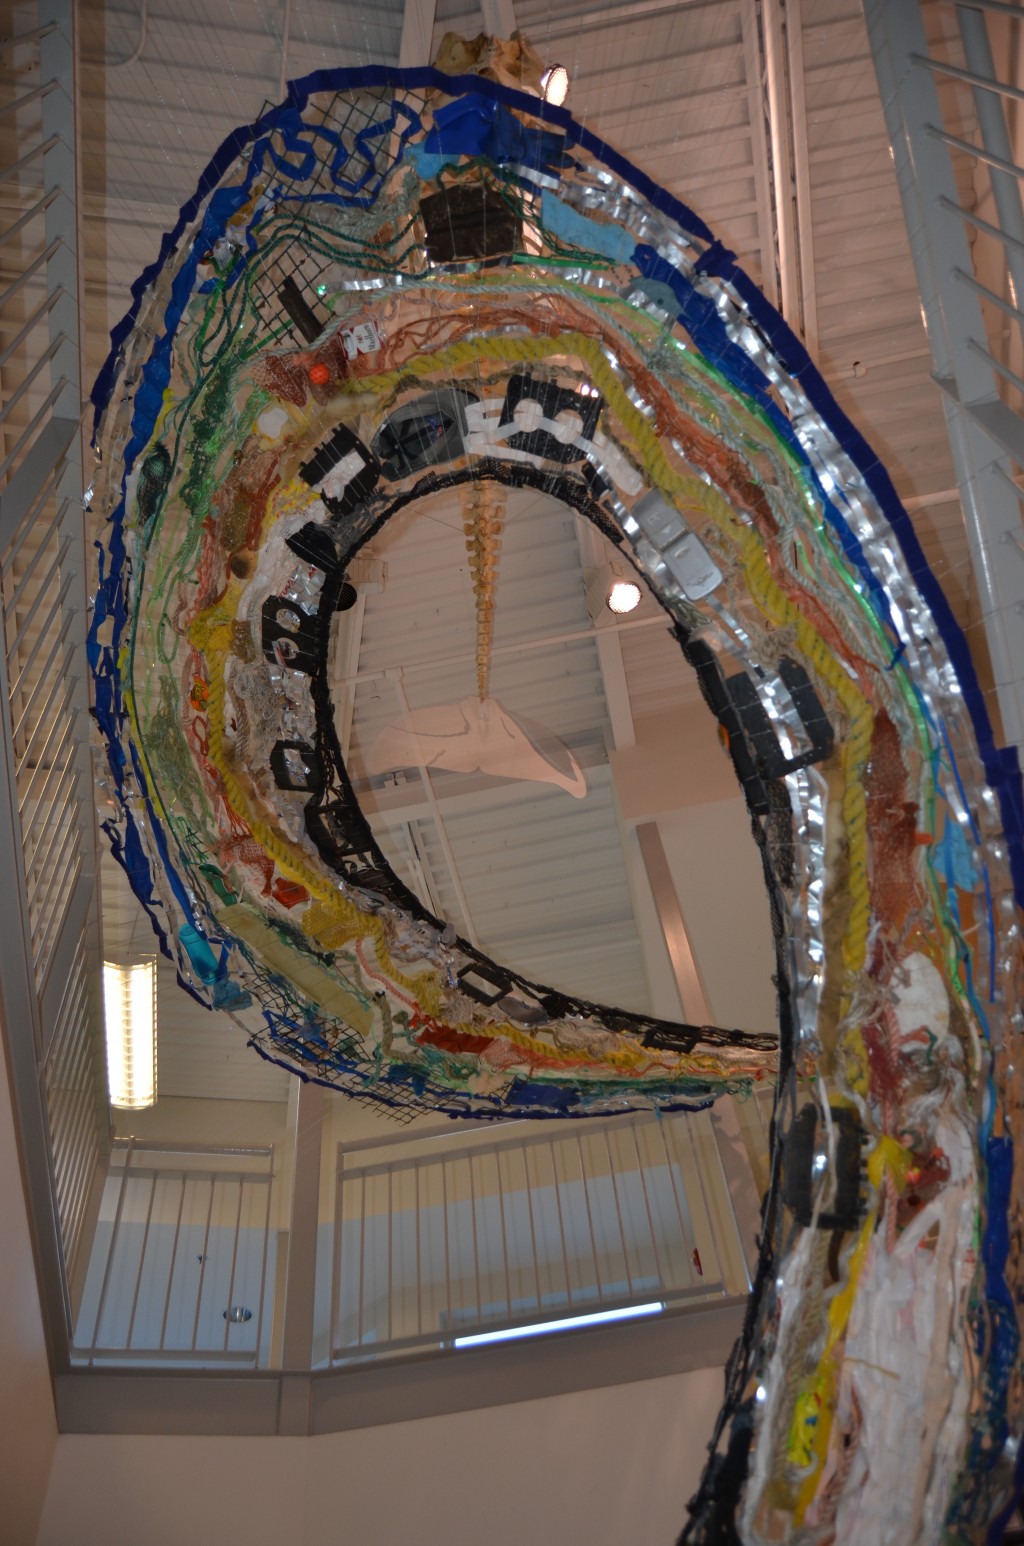 The sculpture is on display in the Arthur P. Girard Marine Science Center